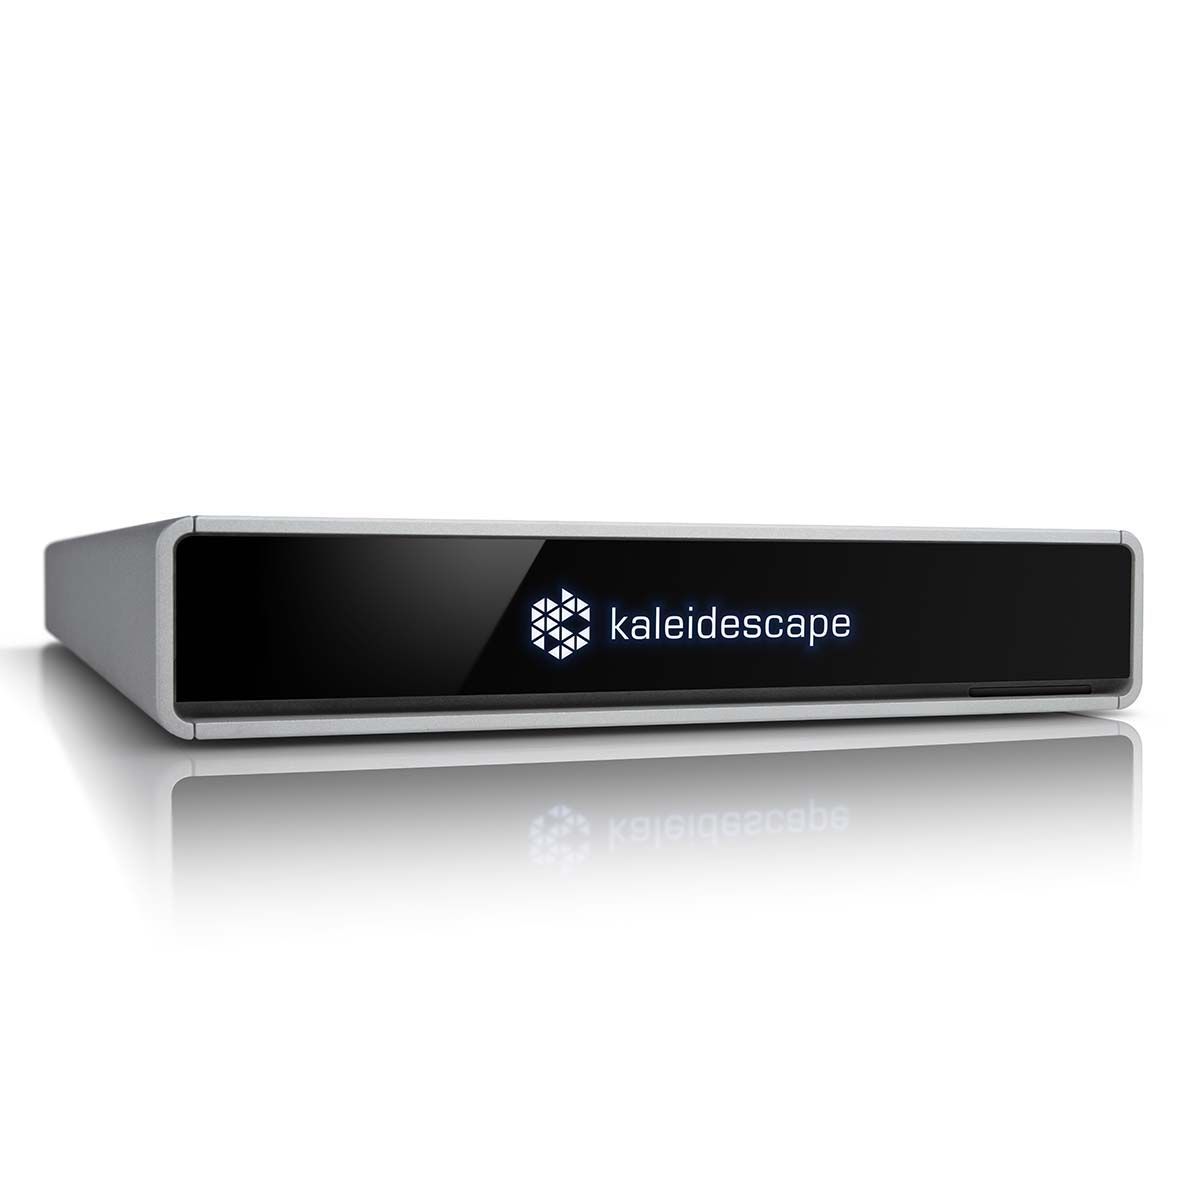 Kaleidescape Compact Terra Movie Server 22TB Storage For Home Theaters | Stores 350 4K UHD Movies